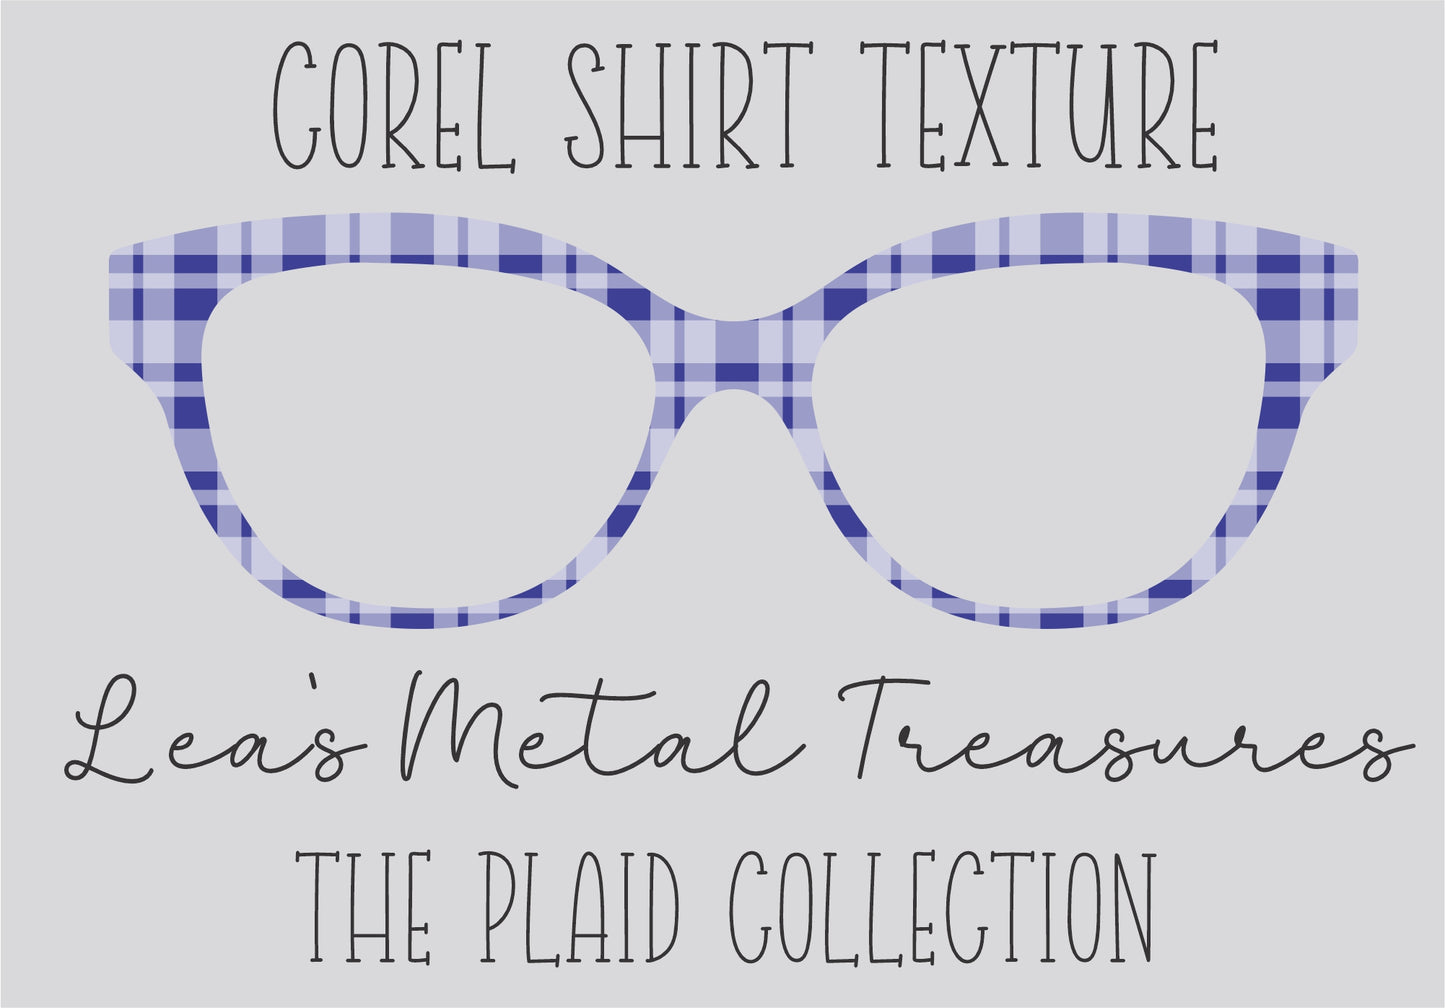 COREL SHIRT TEXTURE Eyewear Frame Toppers COMES WITH MAGNETS